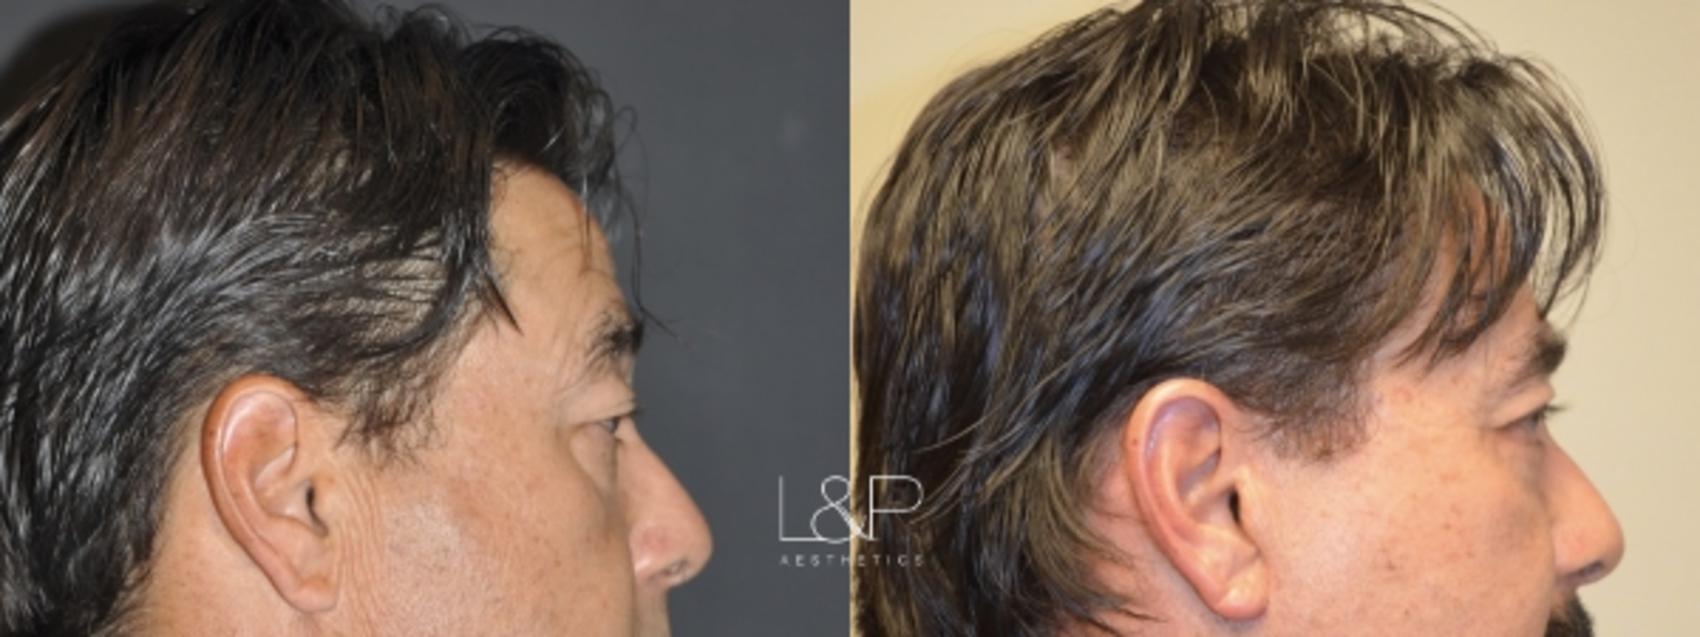 Before & After Facelift & Neck Lift Case 11 Right Side View in Palo Alto & San Jose, California